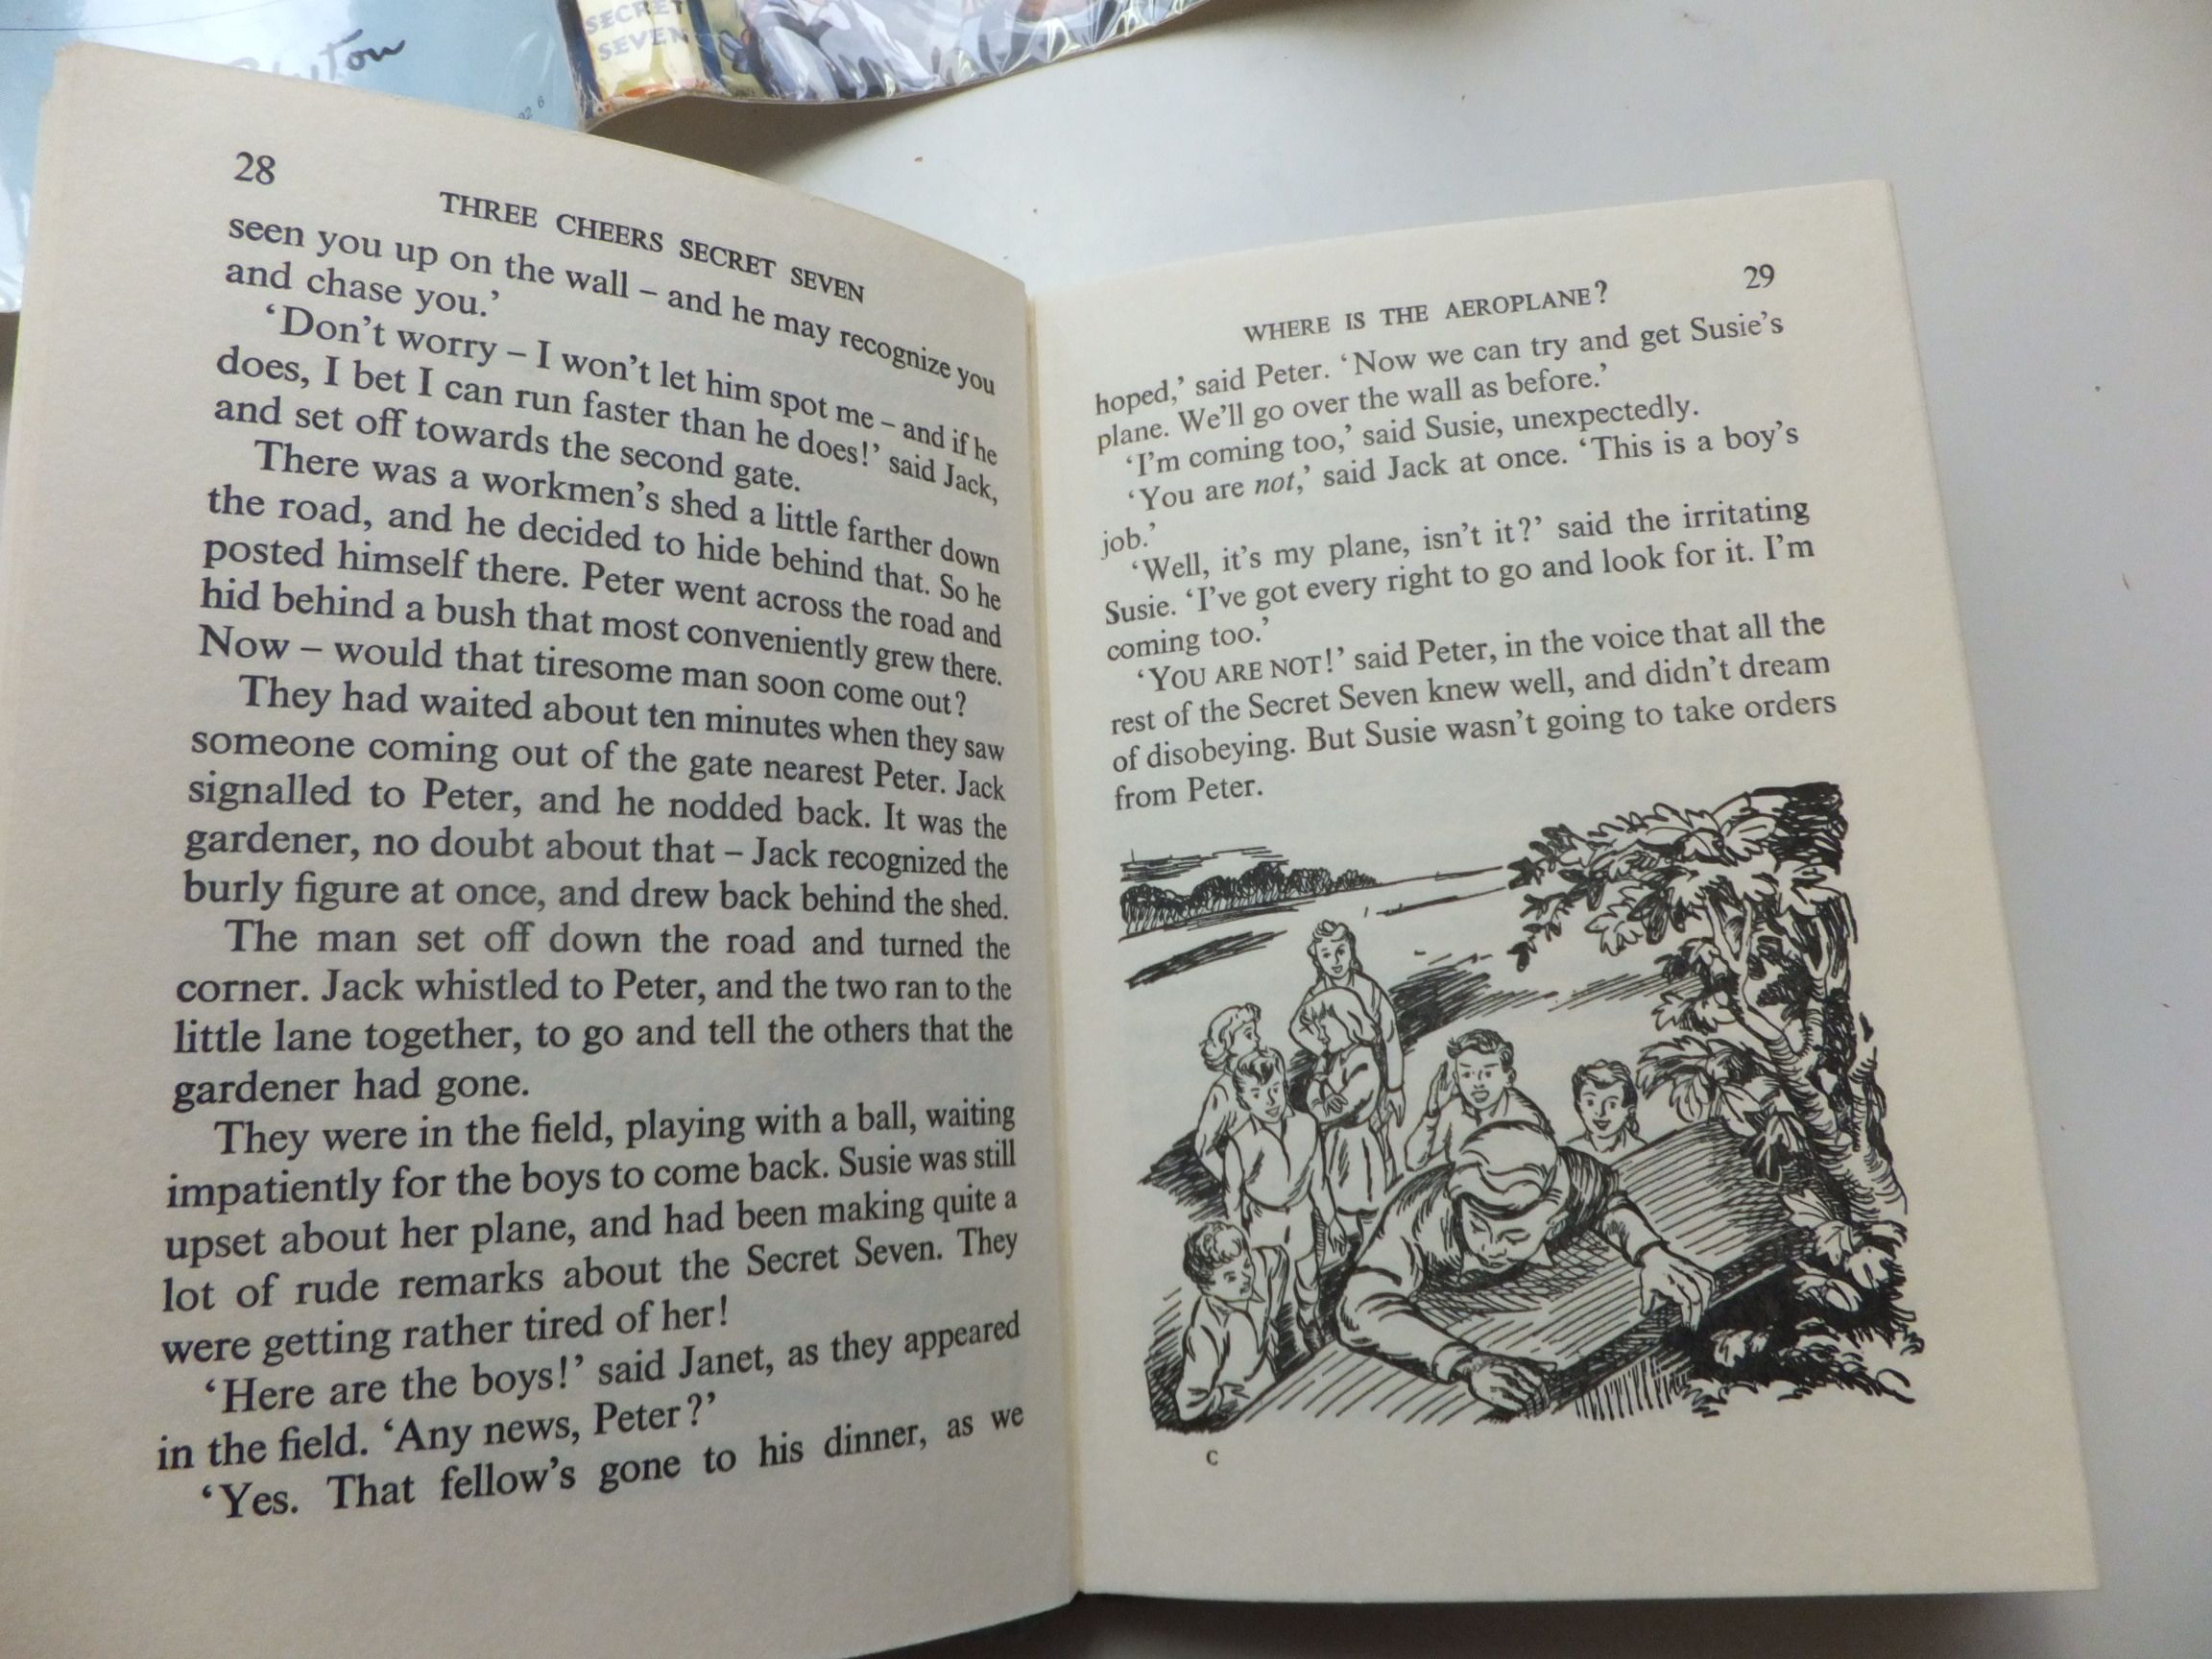 Photo of THREE CHEERS SECRET SEVEN written by Blyton, Enid illustrated by Sharrocks, Burgess published by Brockhampton Press (STOCK CODE: 2113351)  for sale by Stella & Rose's Books